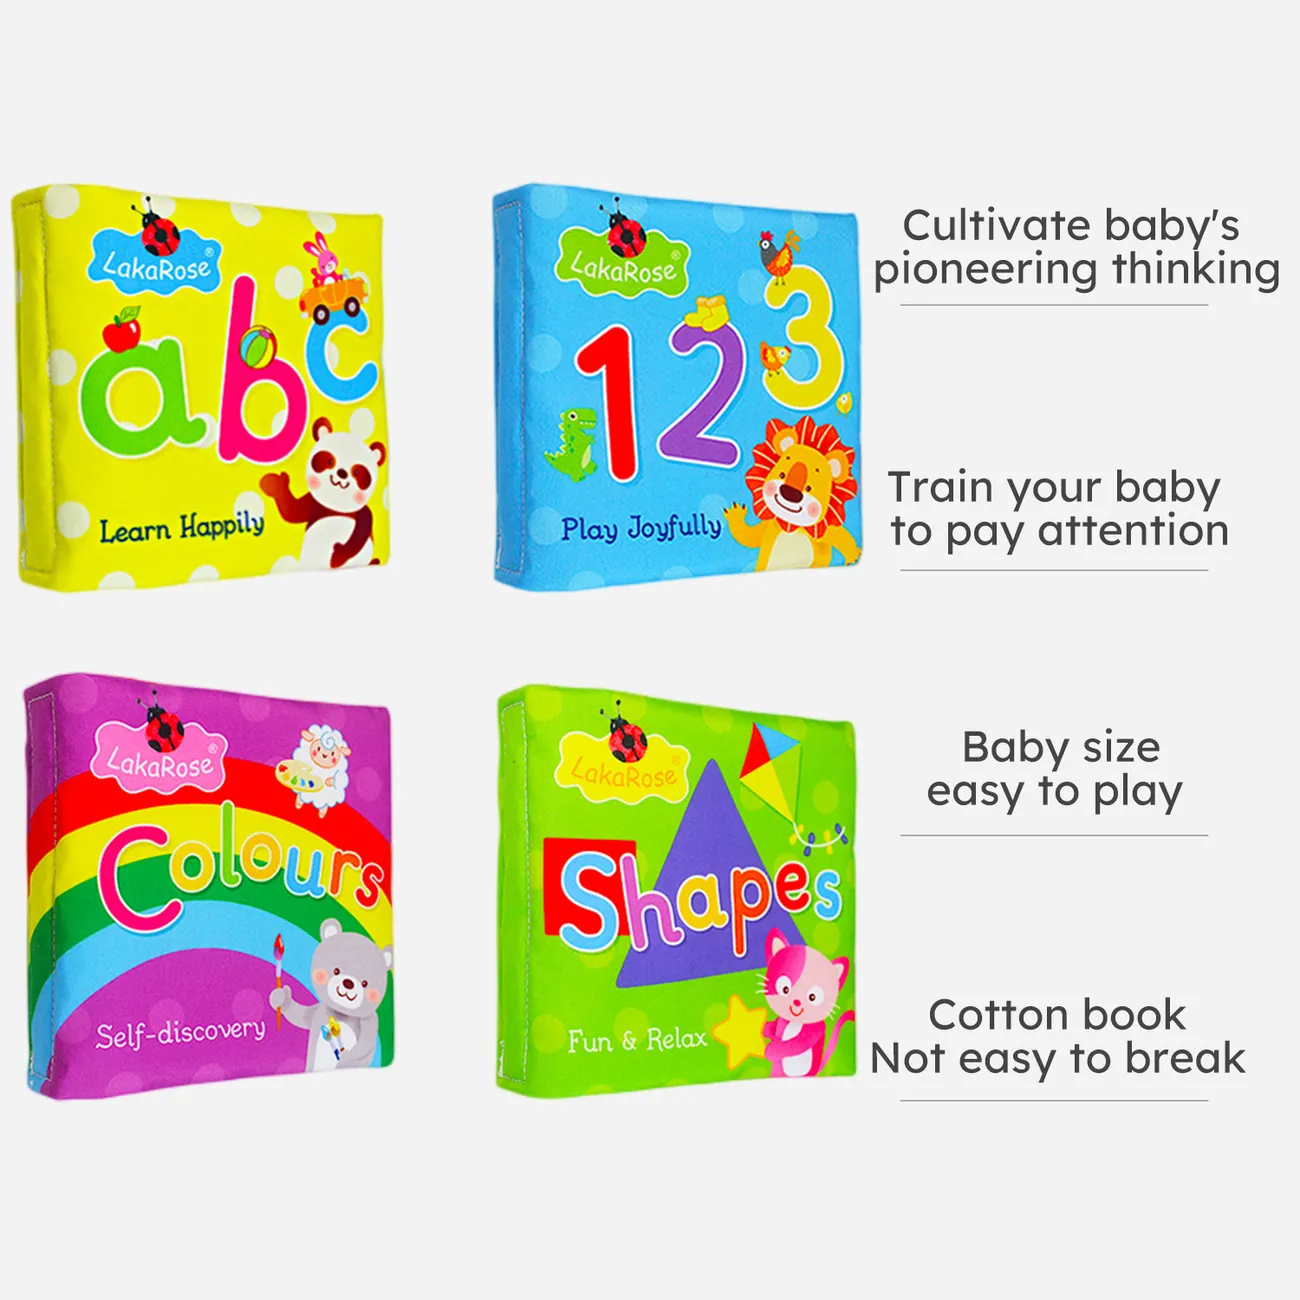 Cloth Baby Book English Alphanumeric Cloth book Touch and Feel Early Educational and Development Toy with Sound Paper 5 pages Green big image 1